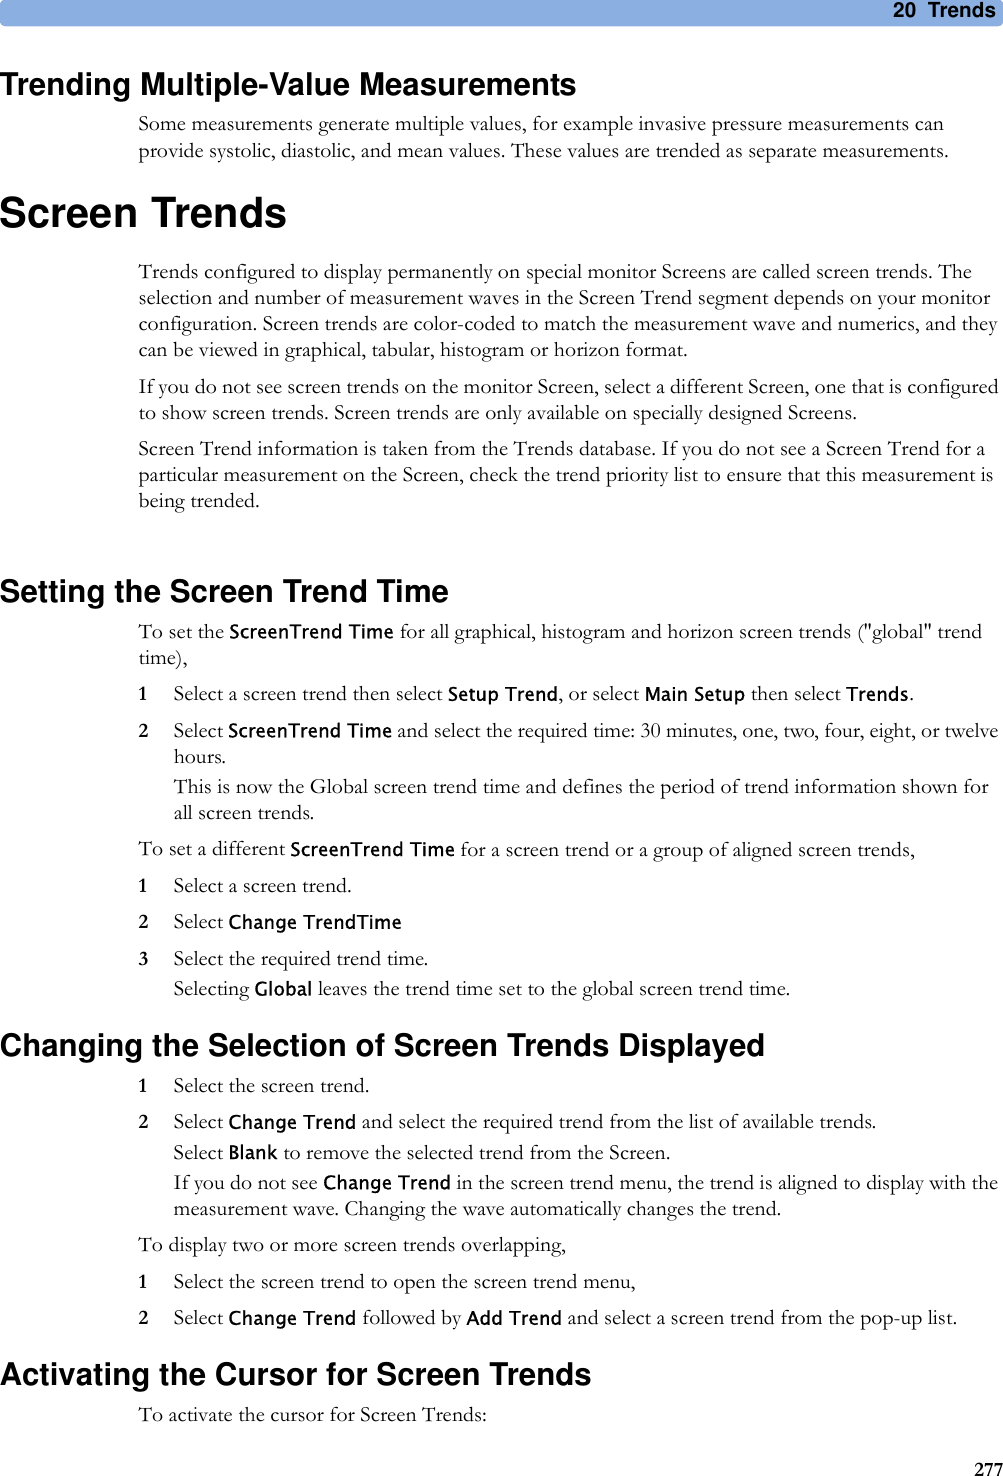 20 Trends277Trending Multiple-Value MeasurementsSome measurements generate multiple values, for example invasive pressure measurements can provide systolic, diastolic, and mean values. These values are trended as separate measurements.Screen TrendsTrends configured to display permanently on special monitor Screens are called screen trends. The selection and number of measurement waves in the Screen Trend segment depends on your monitor configuration. Screen trends are color-coded to match the measurement wave and numerics, and they can be viewed in graphical, tabular, histogram or horizon format.If you do not see screen trends on the monitor Screen, select a different Screen, one that is configured to show screen trends. Screen trends are only available on specially designed Screens.Screen Trend information is taken from the Trends database. If you do not see a Screen Trend for a particular measurement on the Screen, check the trend priority list to ensure that this measurement is being trended.Setting the Screen Trend TimeTo set the ScreenTrend Time for all graphical, histogram and horizon screen trends (&quot;global&quot; trend time),1Select a screen trend then select Setup Trend, or select Main Setup then select Trends.2Select ScreenTrend Time and select the required time: 30 minutes, one, two, four, eight, or twelve hours.This is now the Global screen trend time and defines the period of trend information shown for all screen trends.To set a different ScreenTrend Time for a screen trend or a group of aligned screen trends,1Select a screen trend.2Select Change TrendTime3Select the required trend time.Selecting Global leaves the trend time set to the global screen trend time.Changing the Selection of Screen Trends Displayed1Select the screen trend.2Select Change Trend and select the required trend from the list of available trends.Select Blank to remove the selected trend from the Screen.If you do not see Change Trend in the screen trend menu, the trend is aligned to display with the measurement wave. Changing the wave automatically changes the trend.To display two or more screen trends overlapping,1Select the screen trend to open the screen trend menu,2Select Change Trend followed by Add Trend and select a screen trend from the pop-up list.Activating the Cursor for Screen TrendsTo activate the cursor for Screen Trends: